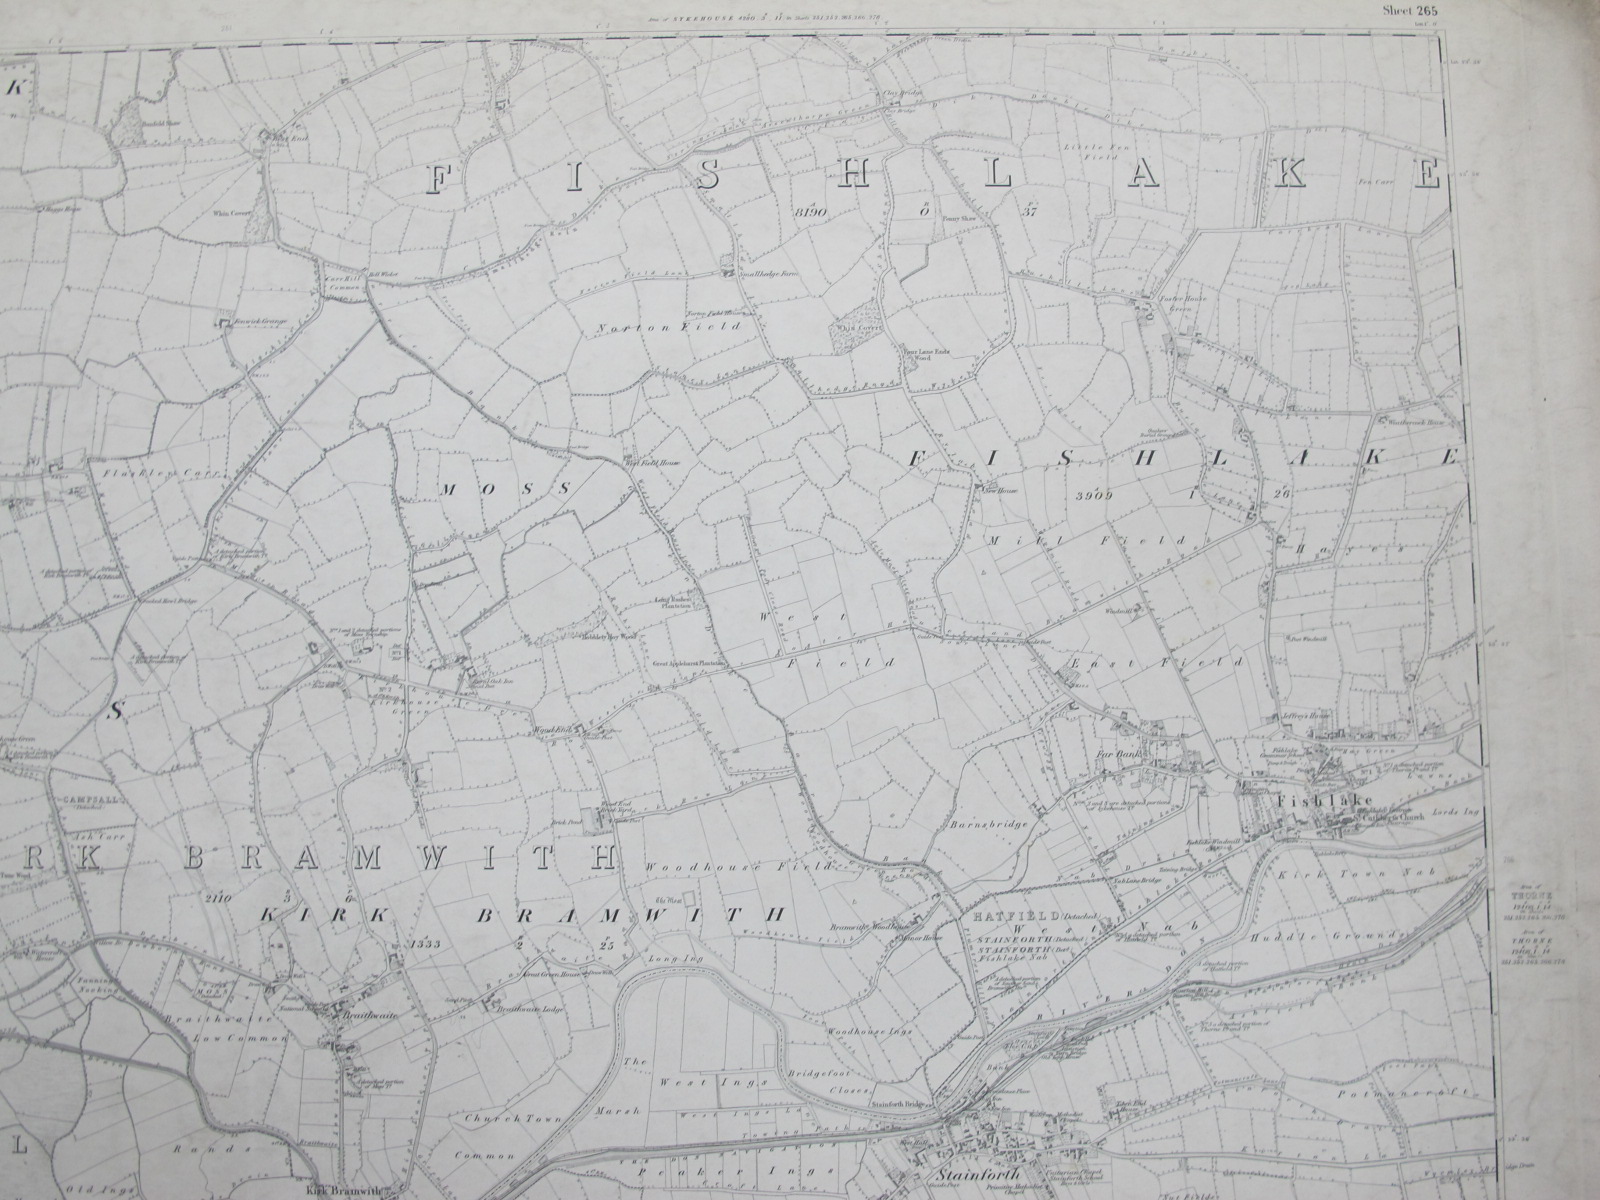 West Riding Yorkshire Maps, Rotherham and area - some dates noted 1902, 1903, 1922, 1935, various - Image 3 of 11